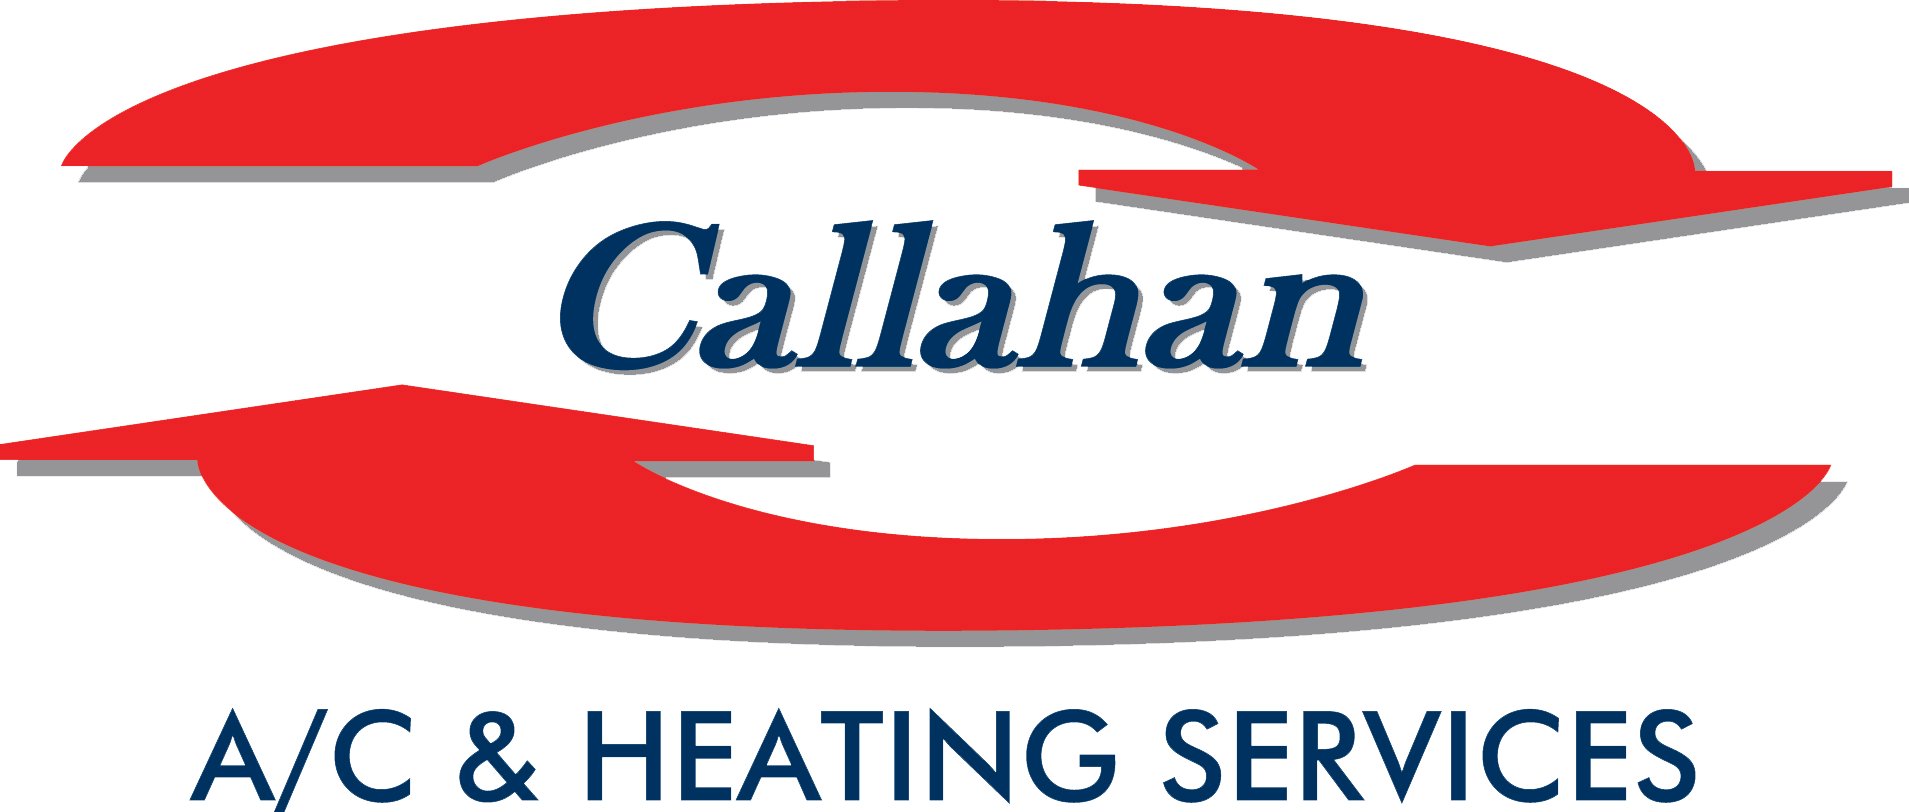 Callahan - Your comfort is our business!